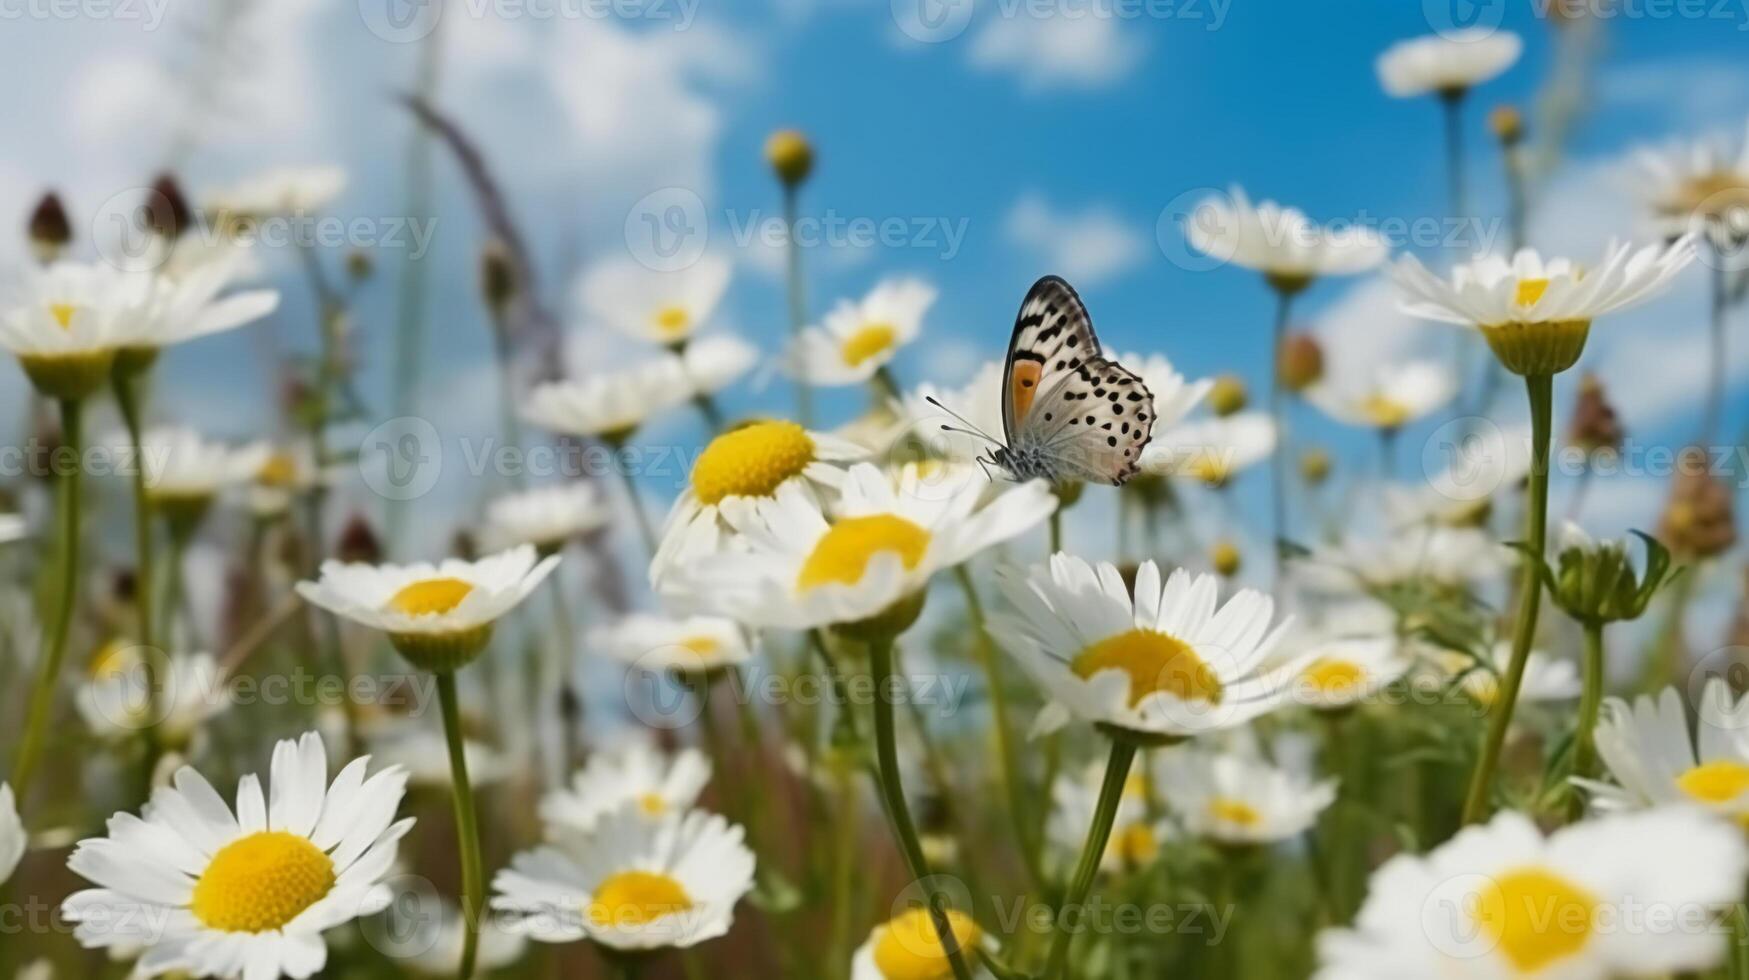 Beautiful white yellow daisies and blue cornflowers with fluttering butterfly in summer in nature against background of blue sky with clouds. photo